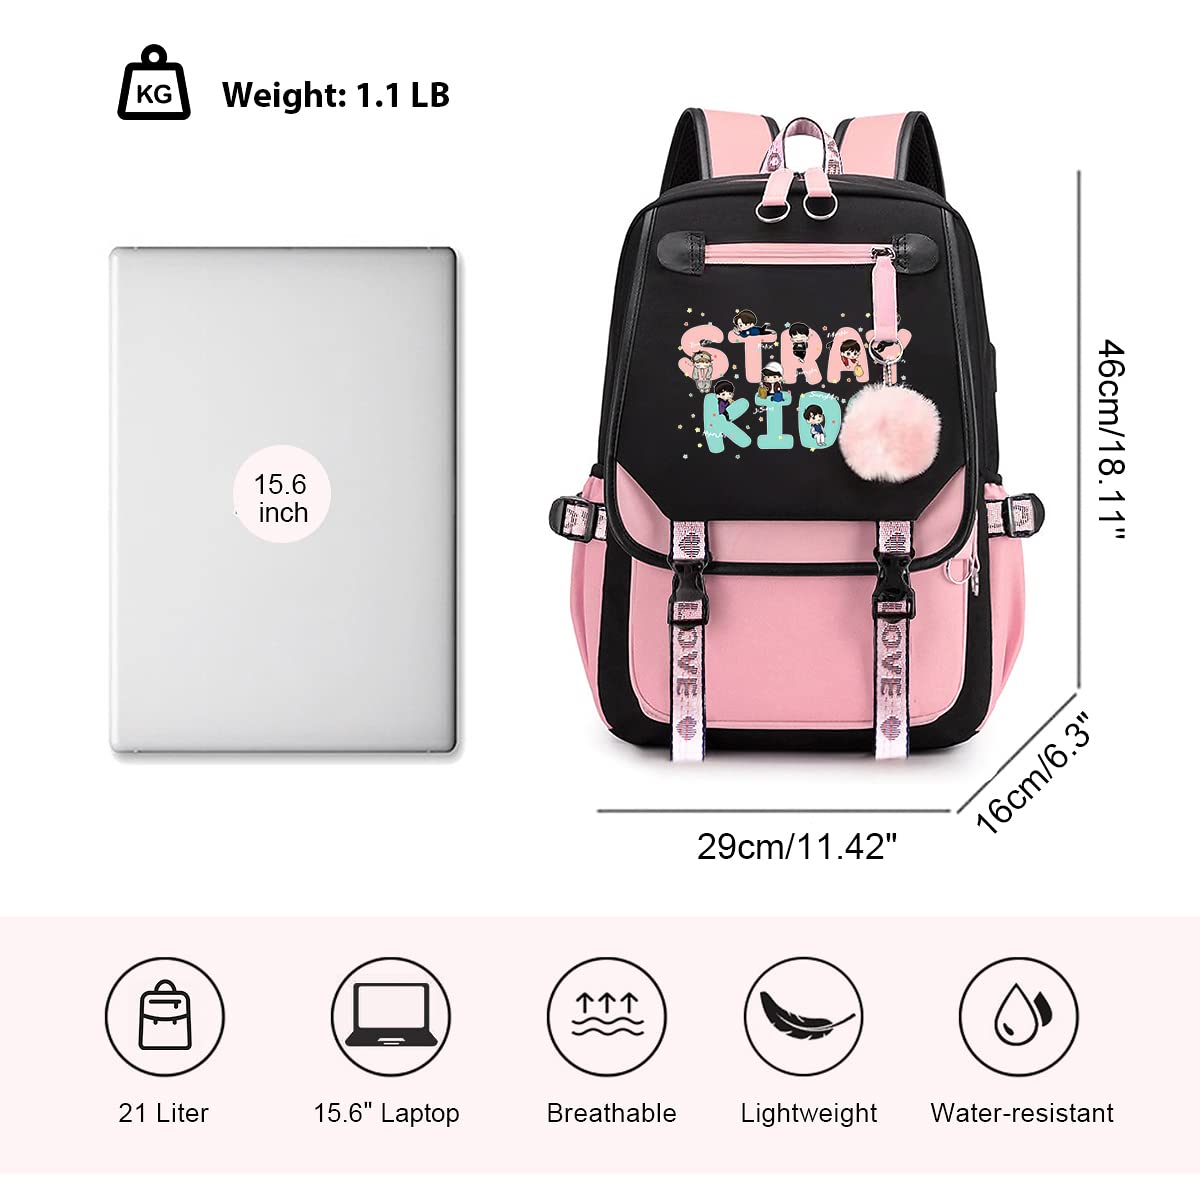 Casual Backpack Laptop Backpack, Women 15.6 Inches College Laptop Bag Travel Outdoor Daypack Bags Vintage Daypacks for Women11.8 in * 8.26 in * 17.3 in (HFR08)